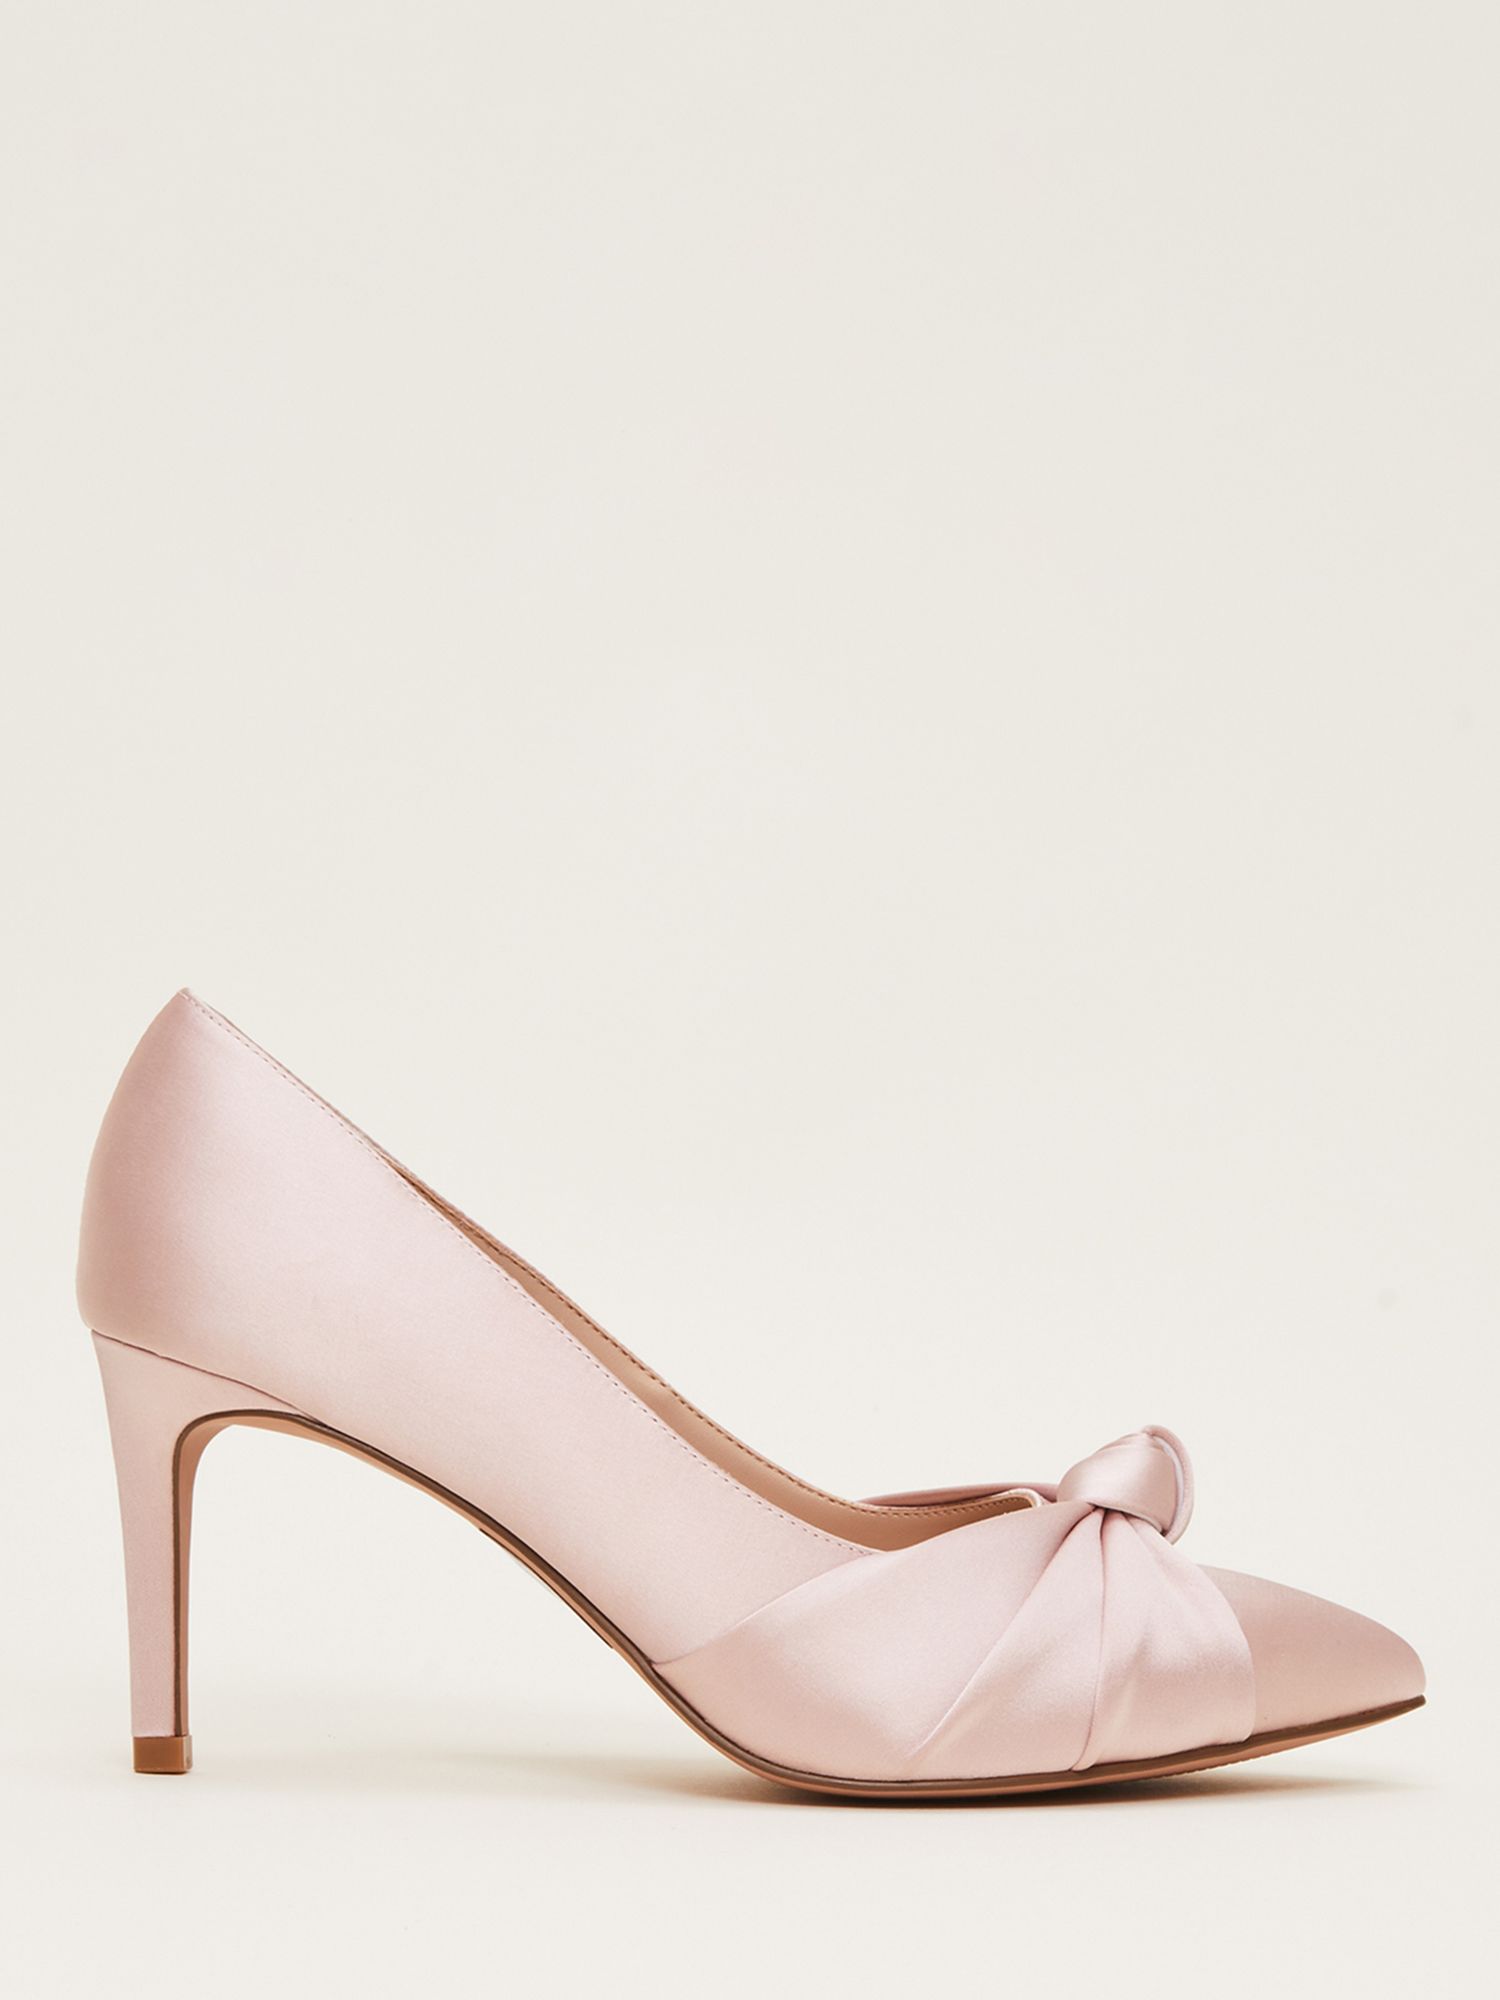 Phase Eight Satin Knot Front Court Shoes, Antique Rose, 3